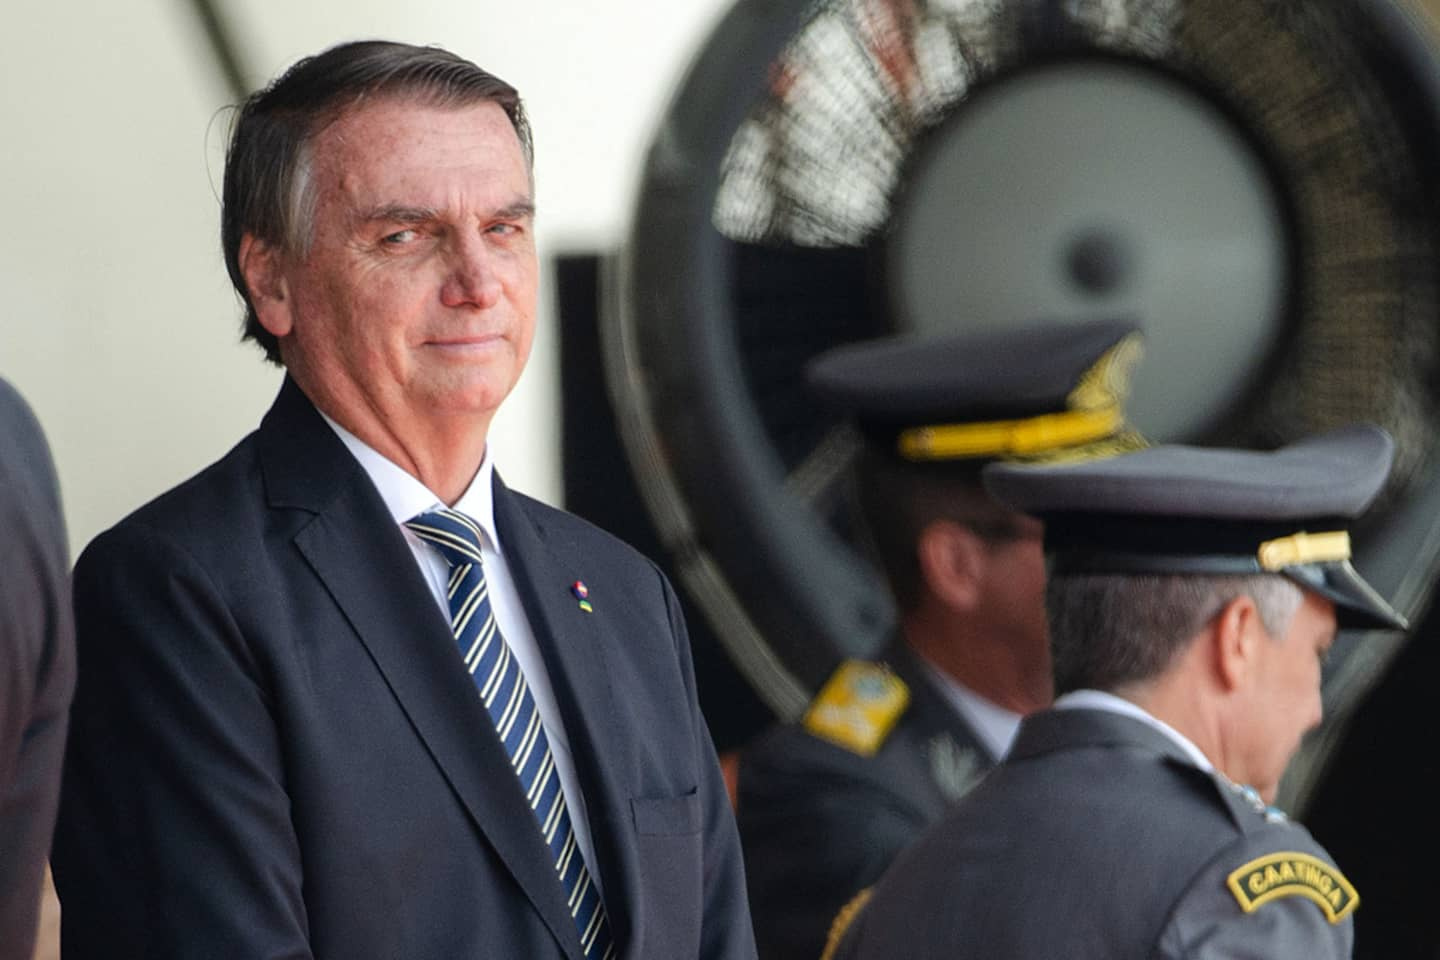 Brazil: a pro-Bolsonaro arrested for trying to create "chaos" with explosives